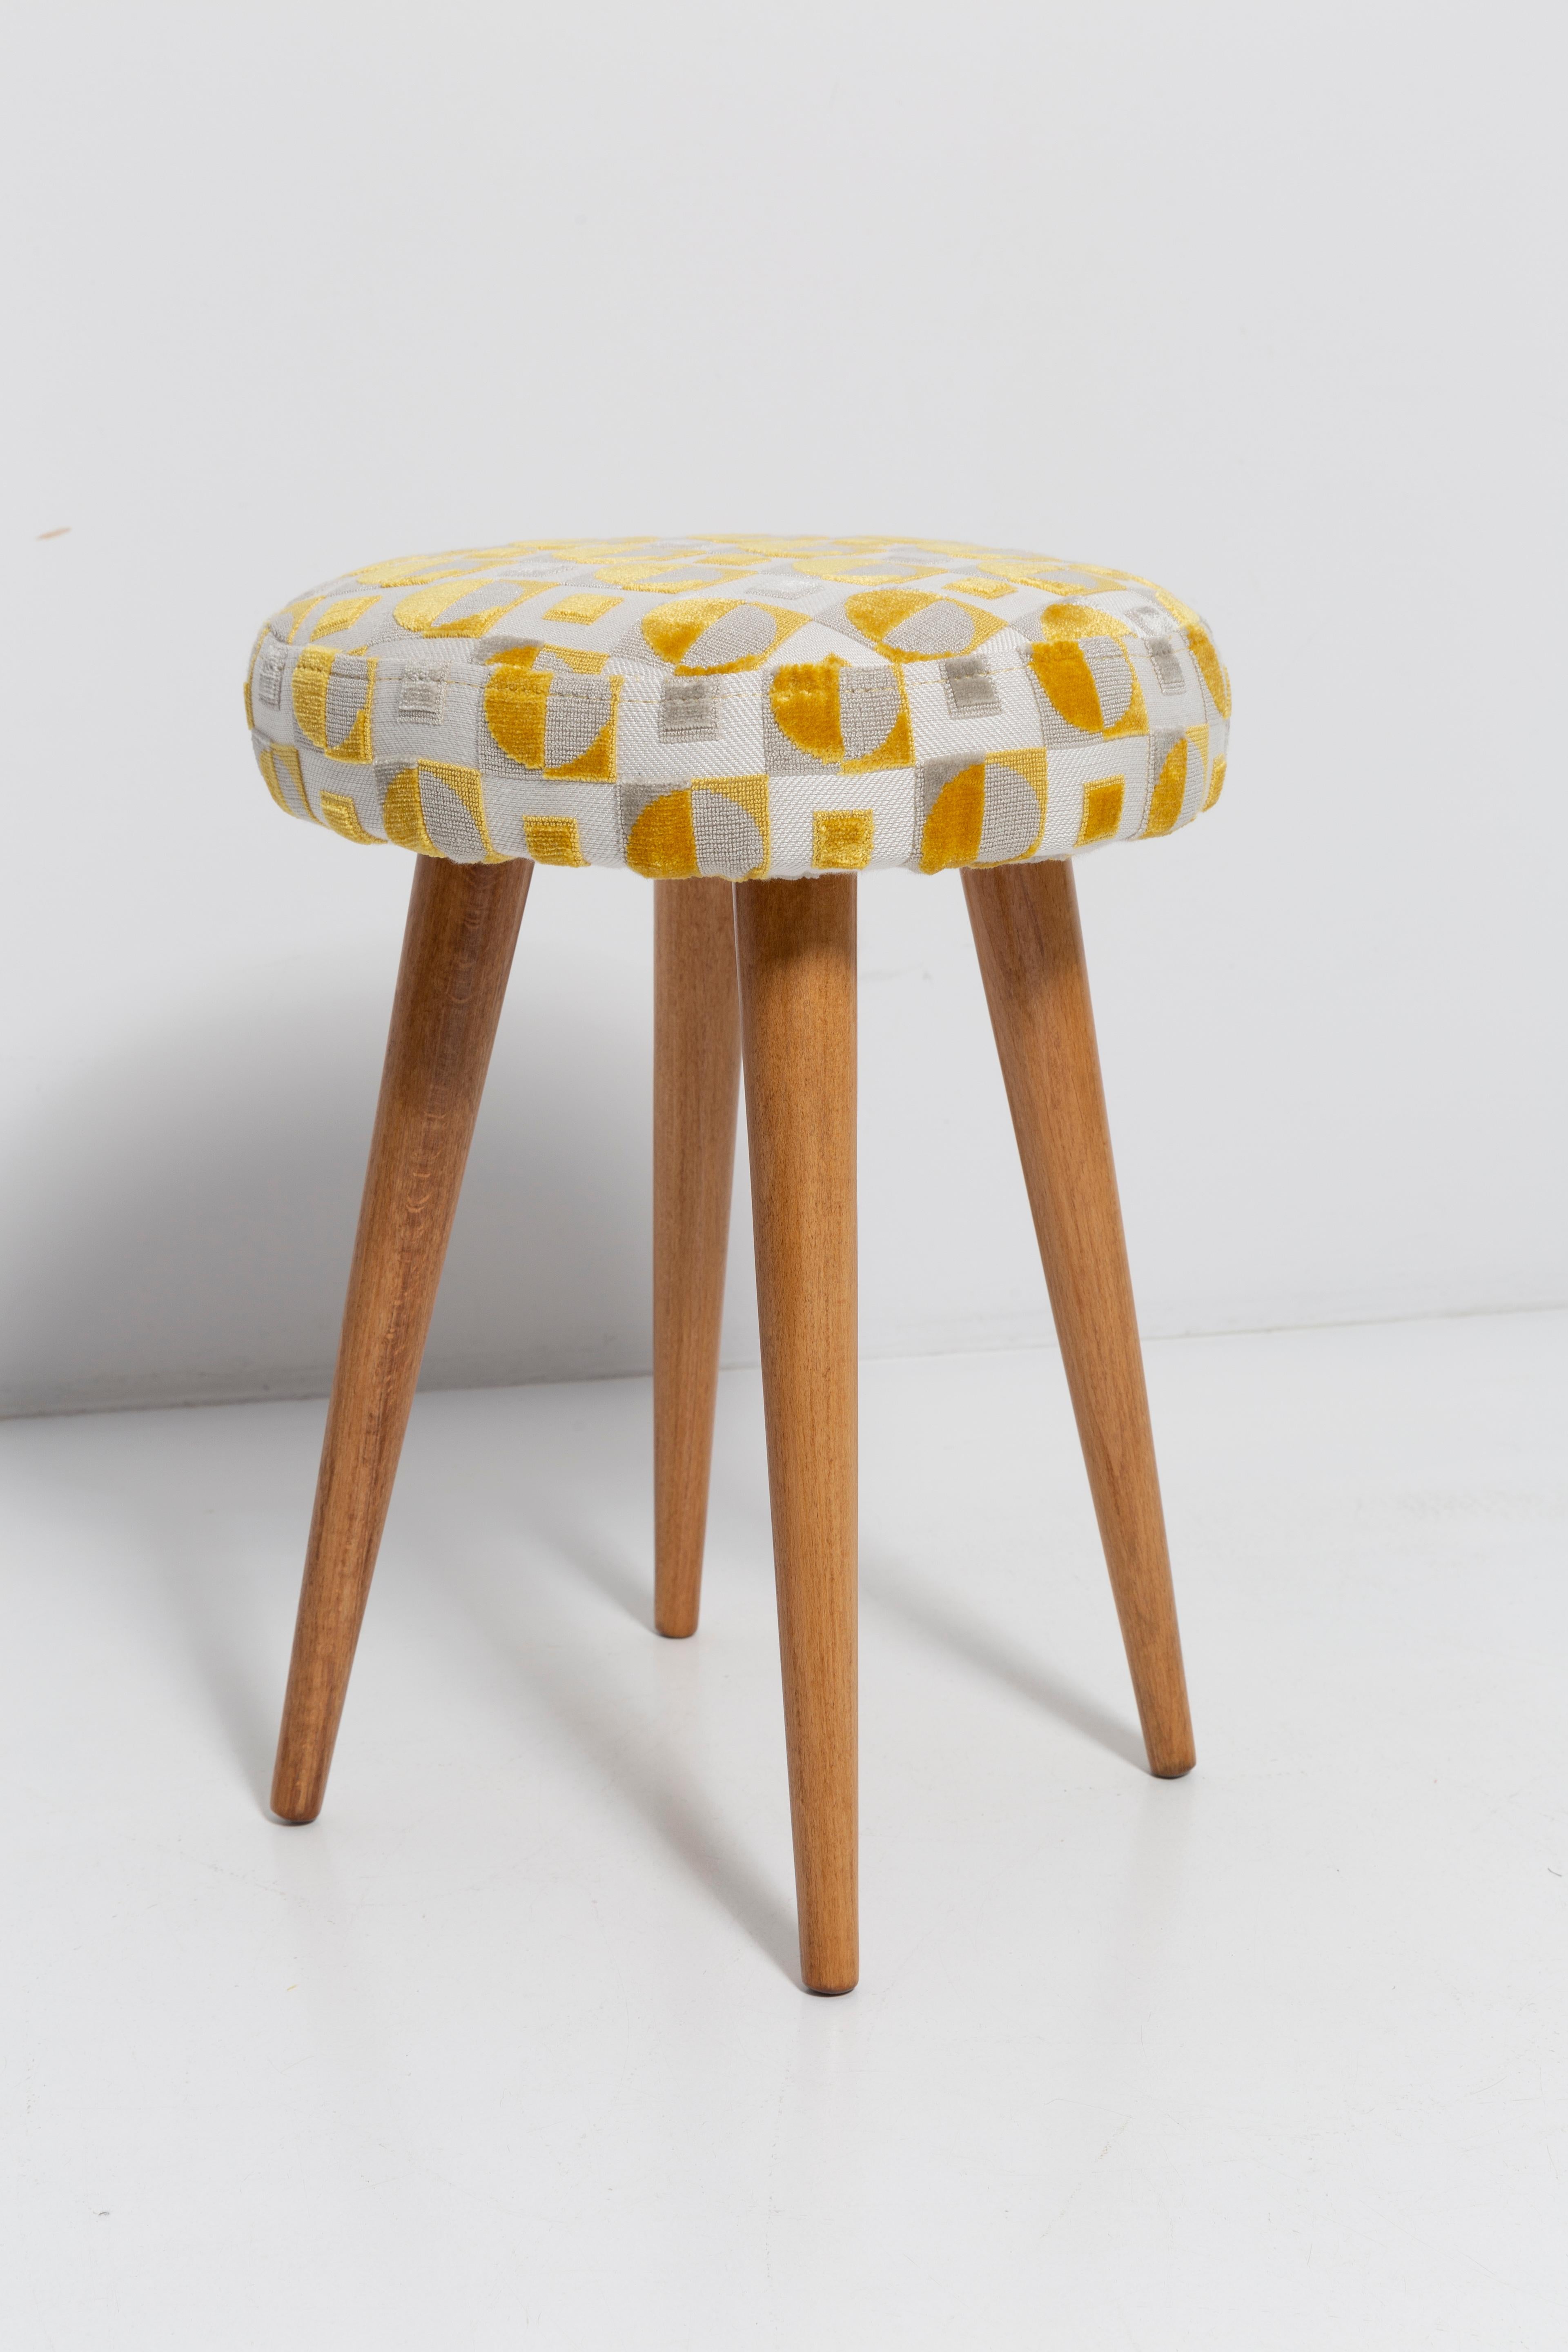 Stool from the turn of the 1960s and 1970s. Beautiful beige and yellow upholstery. The stool consists of an upholstered part, a seat and wooden legs narrowing downwards, characteristic of the 1960s style. We can prepare this pair also in another